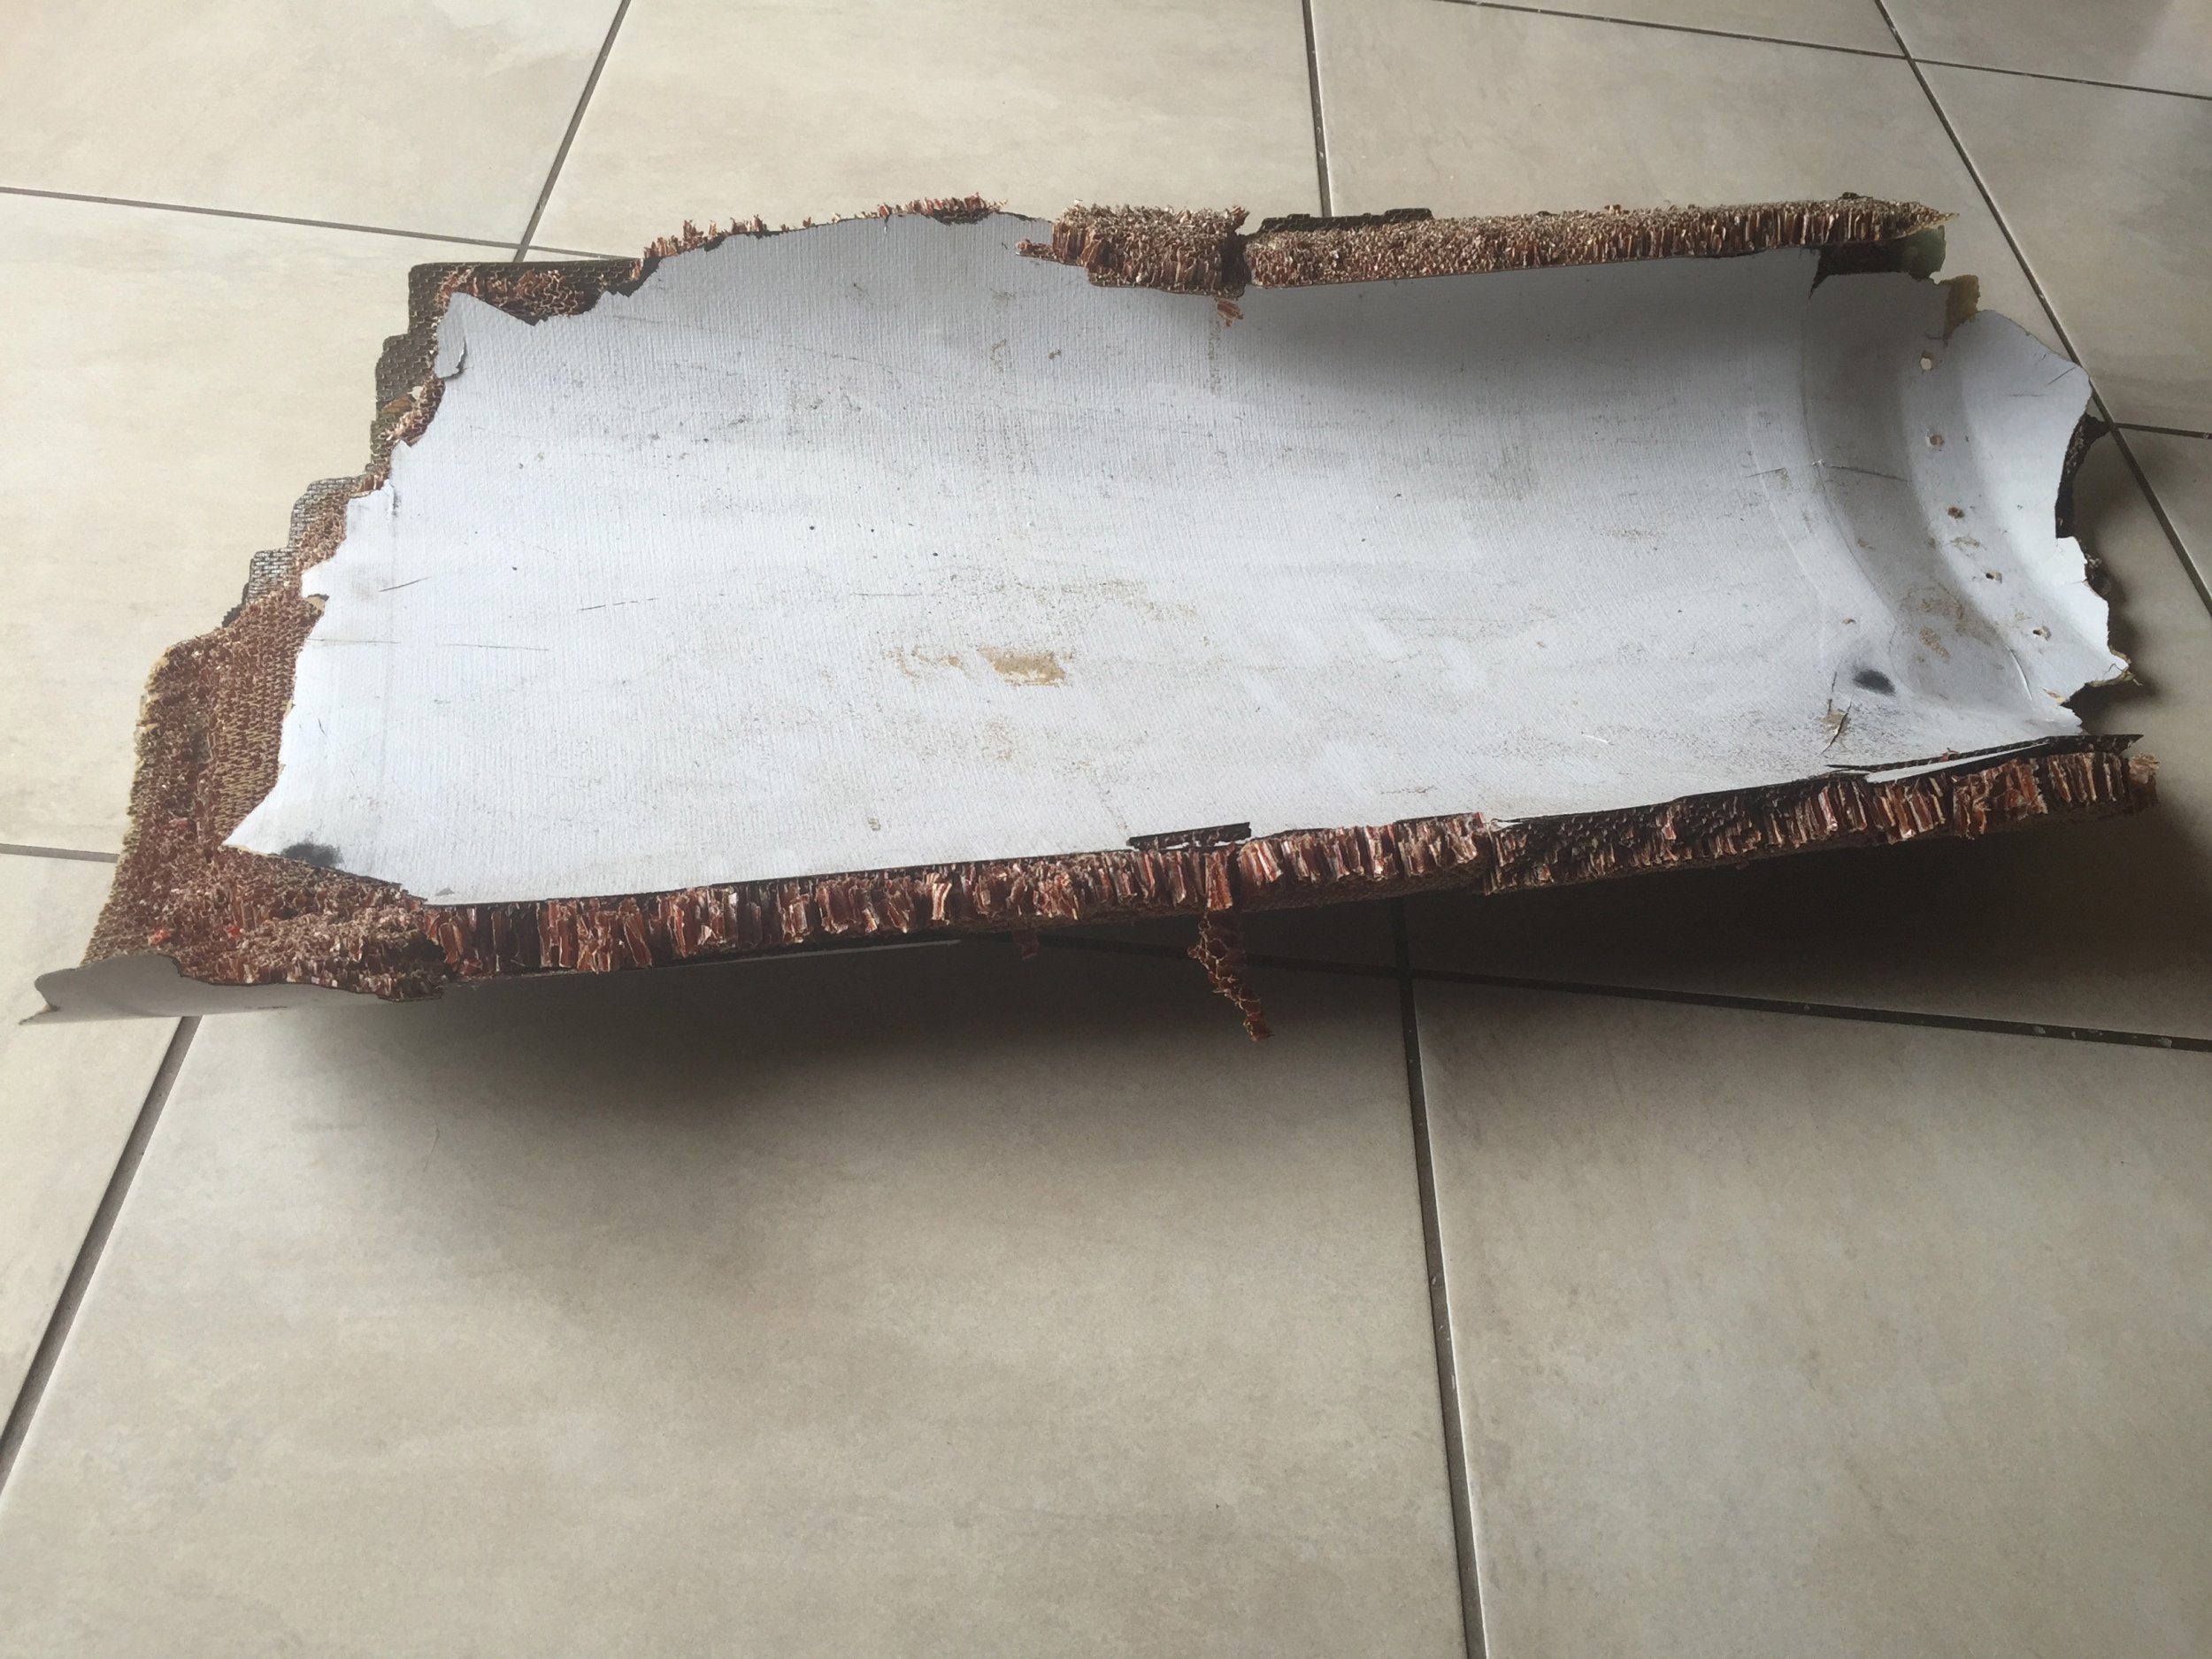 A piece of debris "almost certainly" from MH370, according to Australia's transport minister.